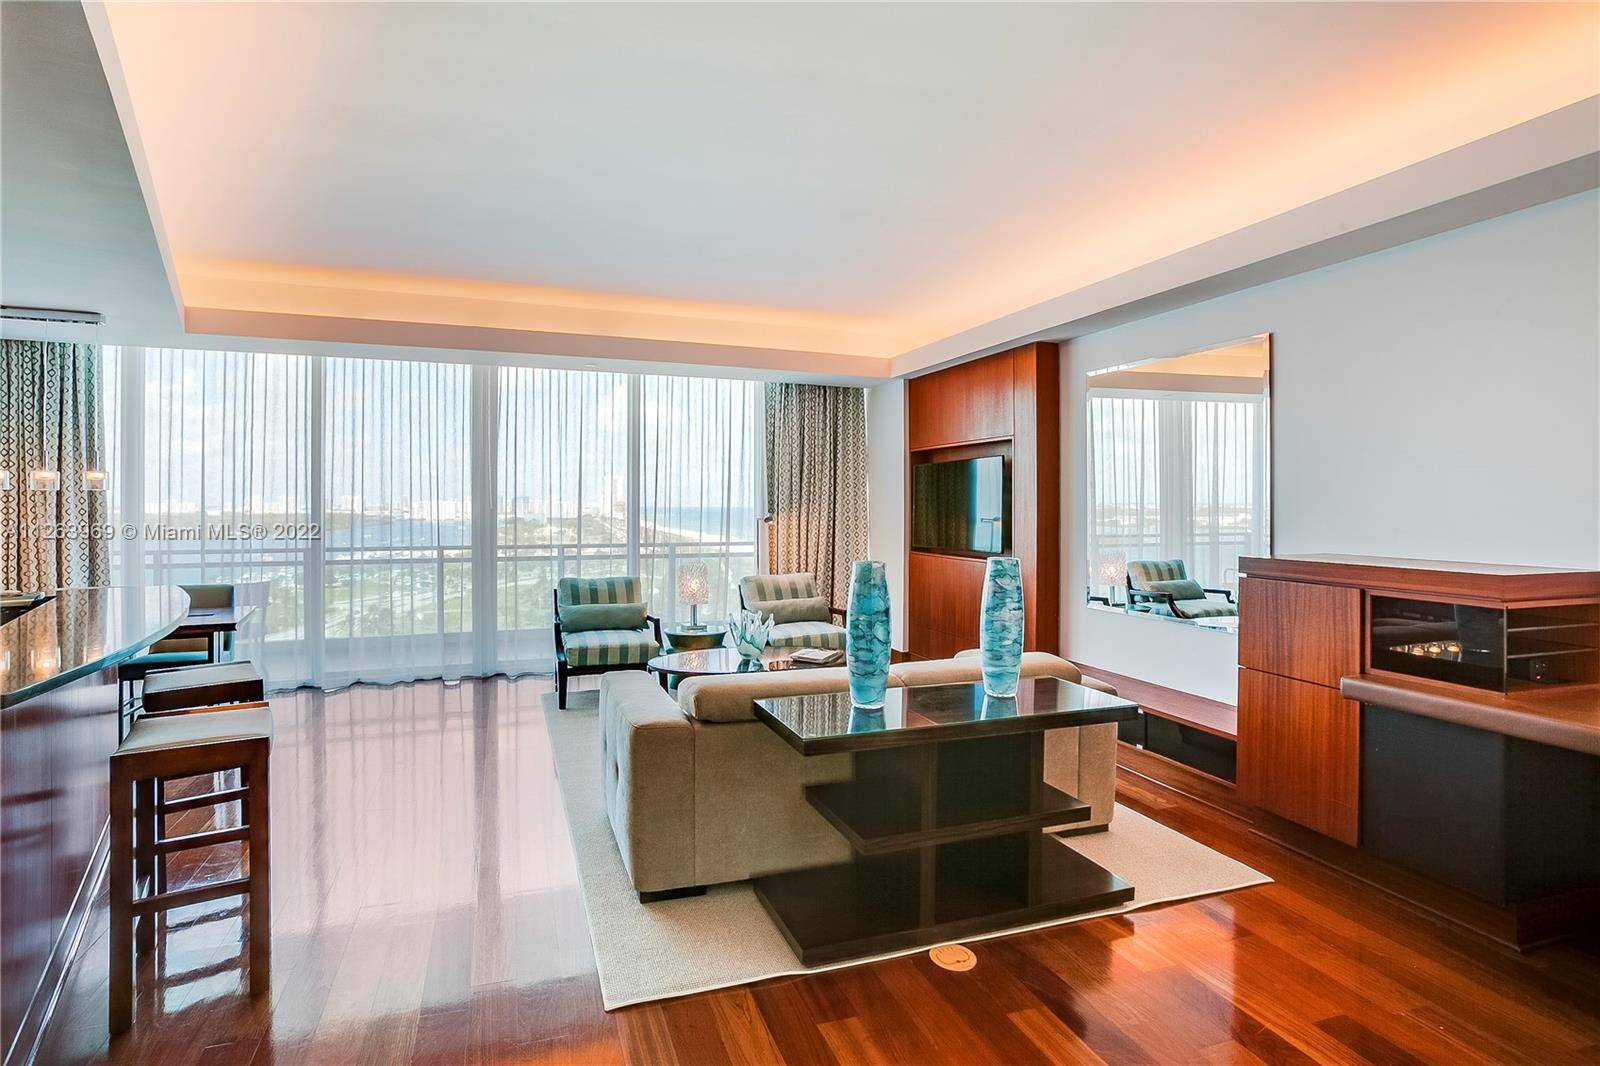 Luxe ocean suite at the Ritz ; enjoy Ritz signature 5 star amenities at a significant savings compared to the hotel rates ; 16th floor turnkey, 2 bedrooms, 2.